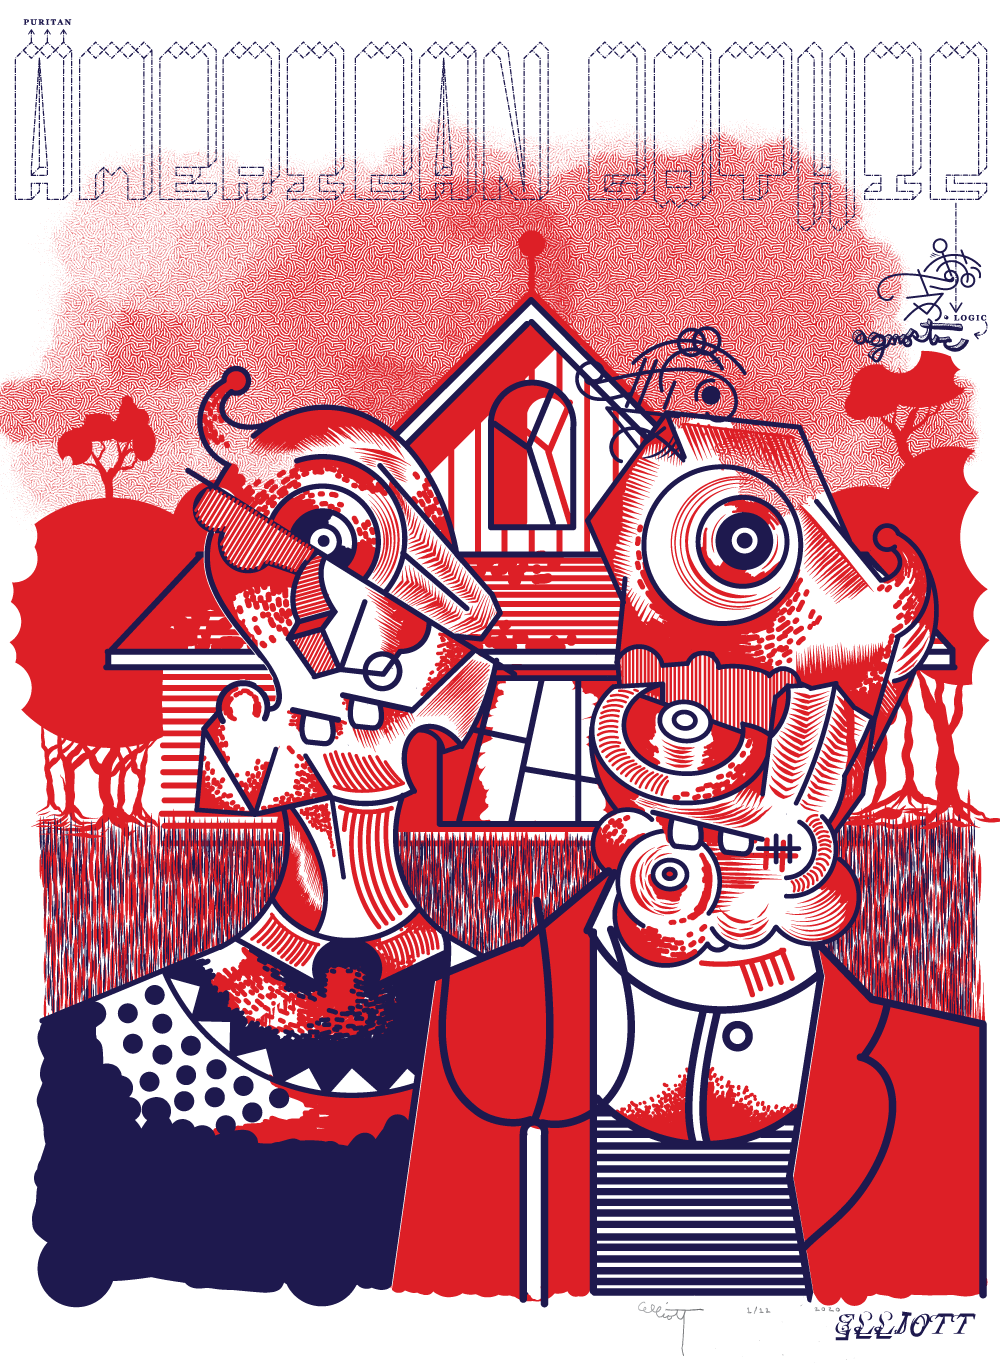 "Puritan American Gothic Agnostic Logic"
By Elliott Earls
22 x 30″
Two Spot Colors – Edition of 12
Printed on Rives BFK 250gsm. Heavy Weight 100% Cotton Paper with a Deckle Edge
Signed & numbered by the Artist
Released October 12, 2020.